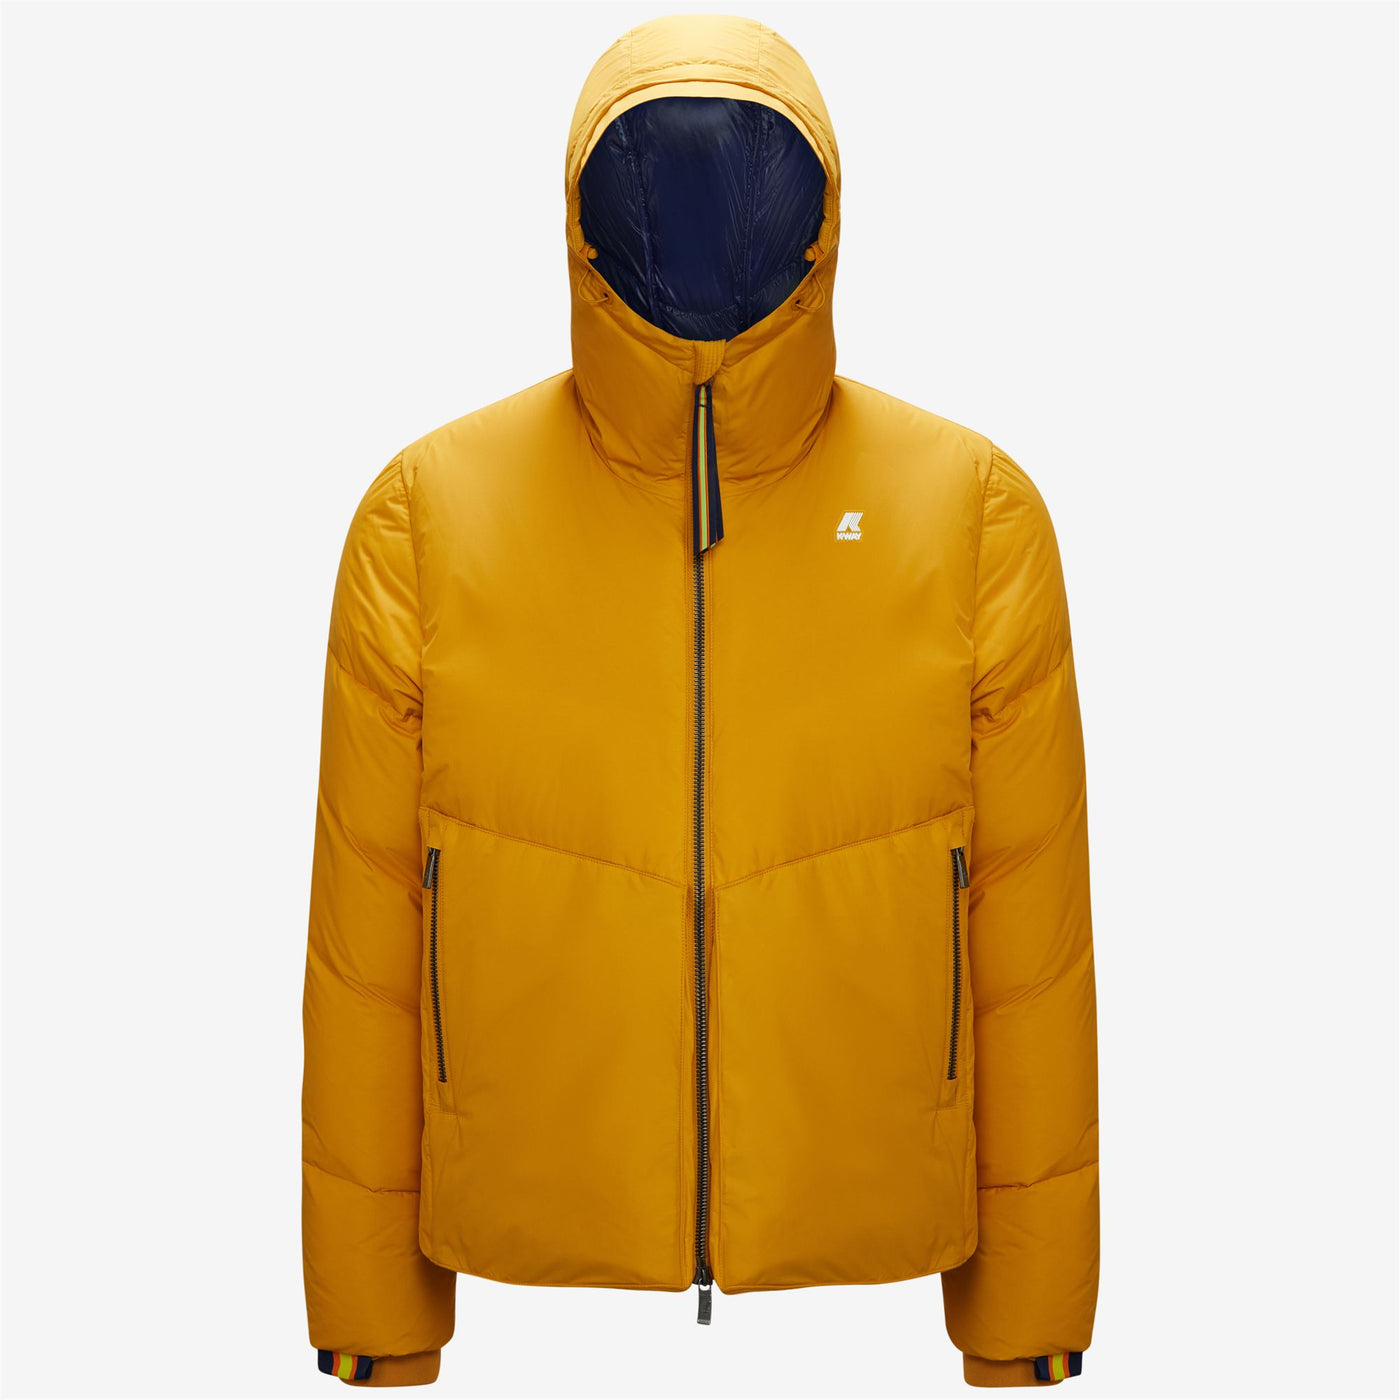 Jackets Man HUGOL THERMO SOFT TOUCH Short YELLOW RASPBERRY - BLUE MEDIEVAL Photo (jpg Rgb)			